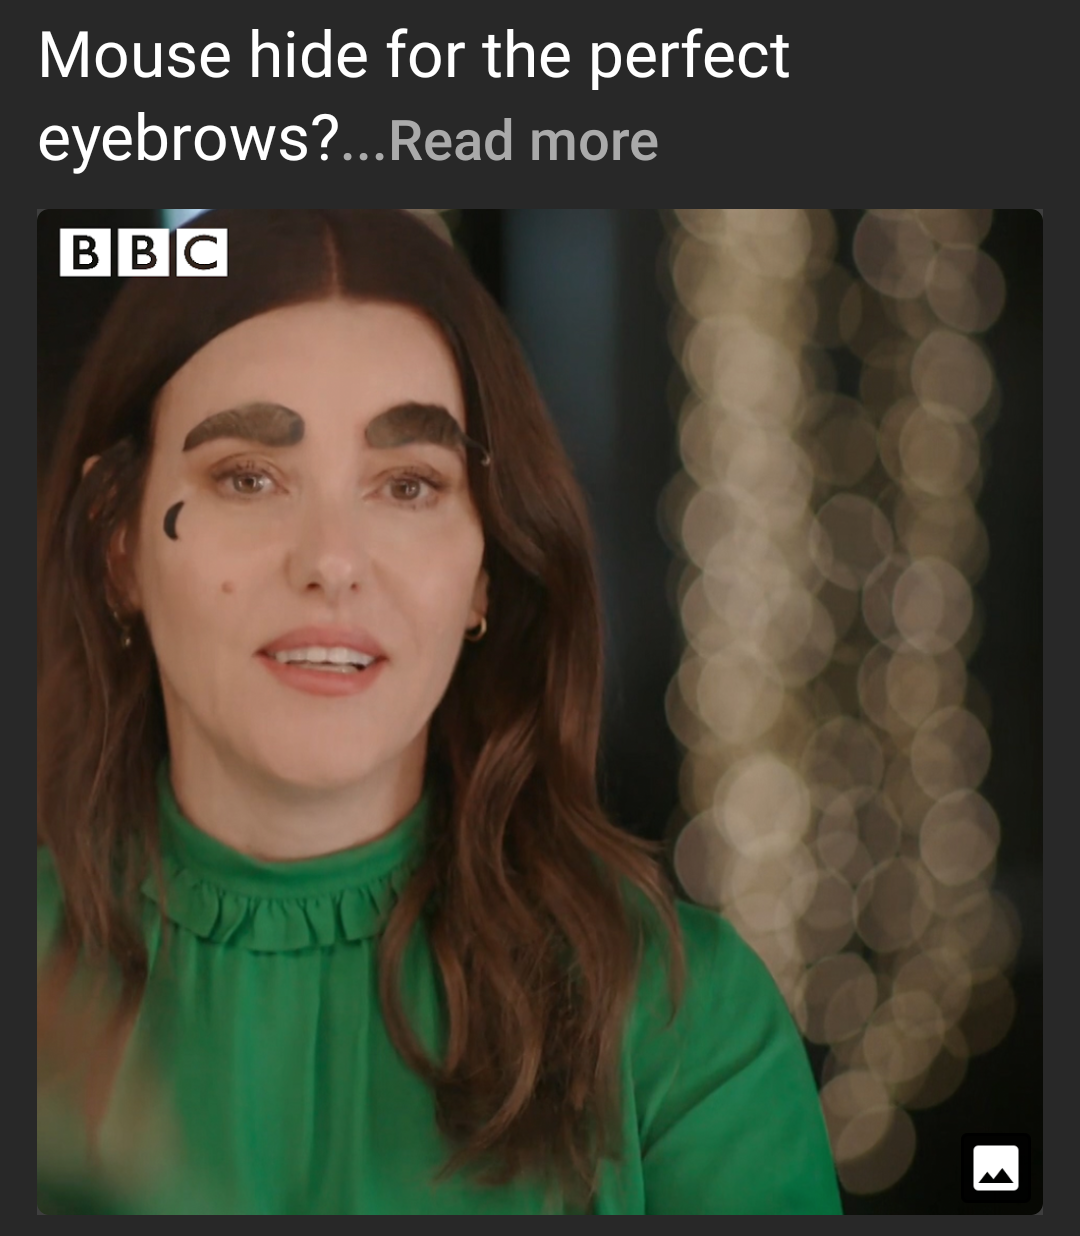 monday morning randomness - lisa eldridge bbc a glamorous history - Mouse hide for the perfect eyebrows?... Read more Bbc 1